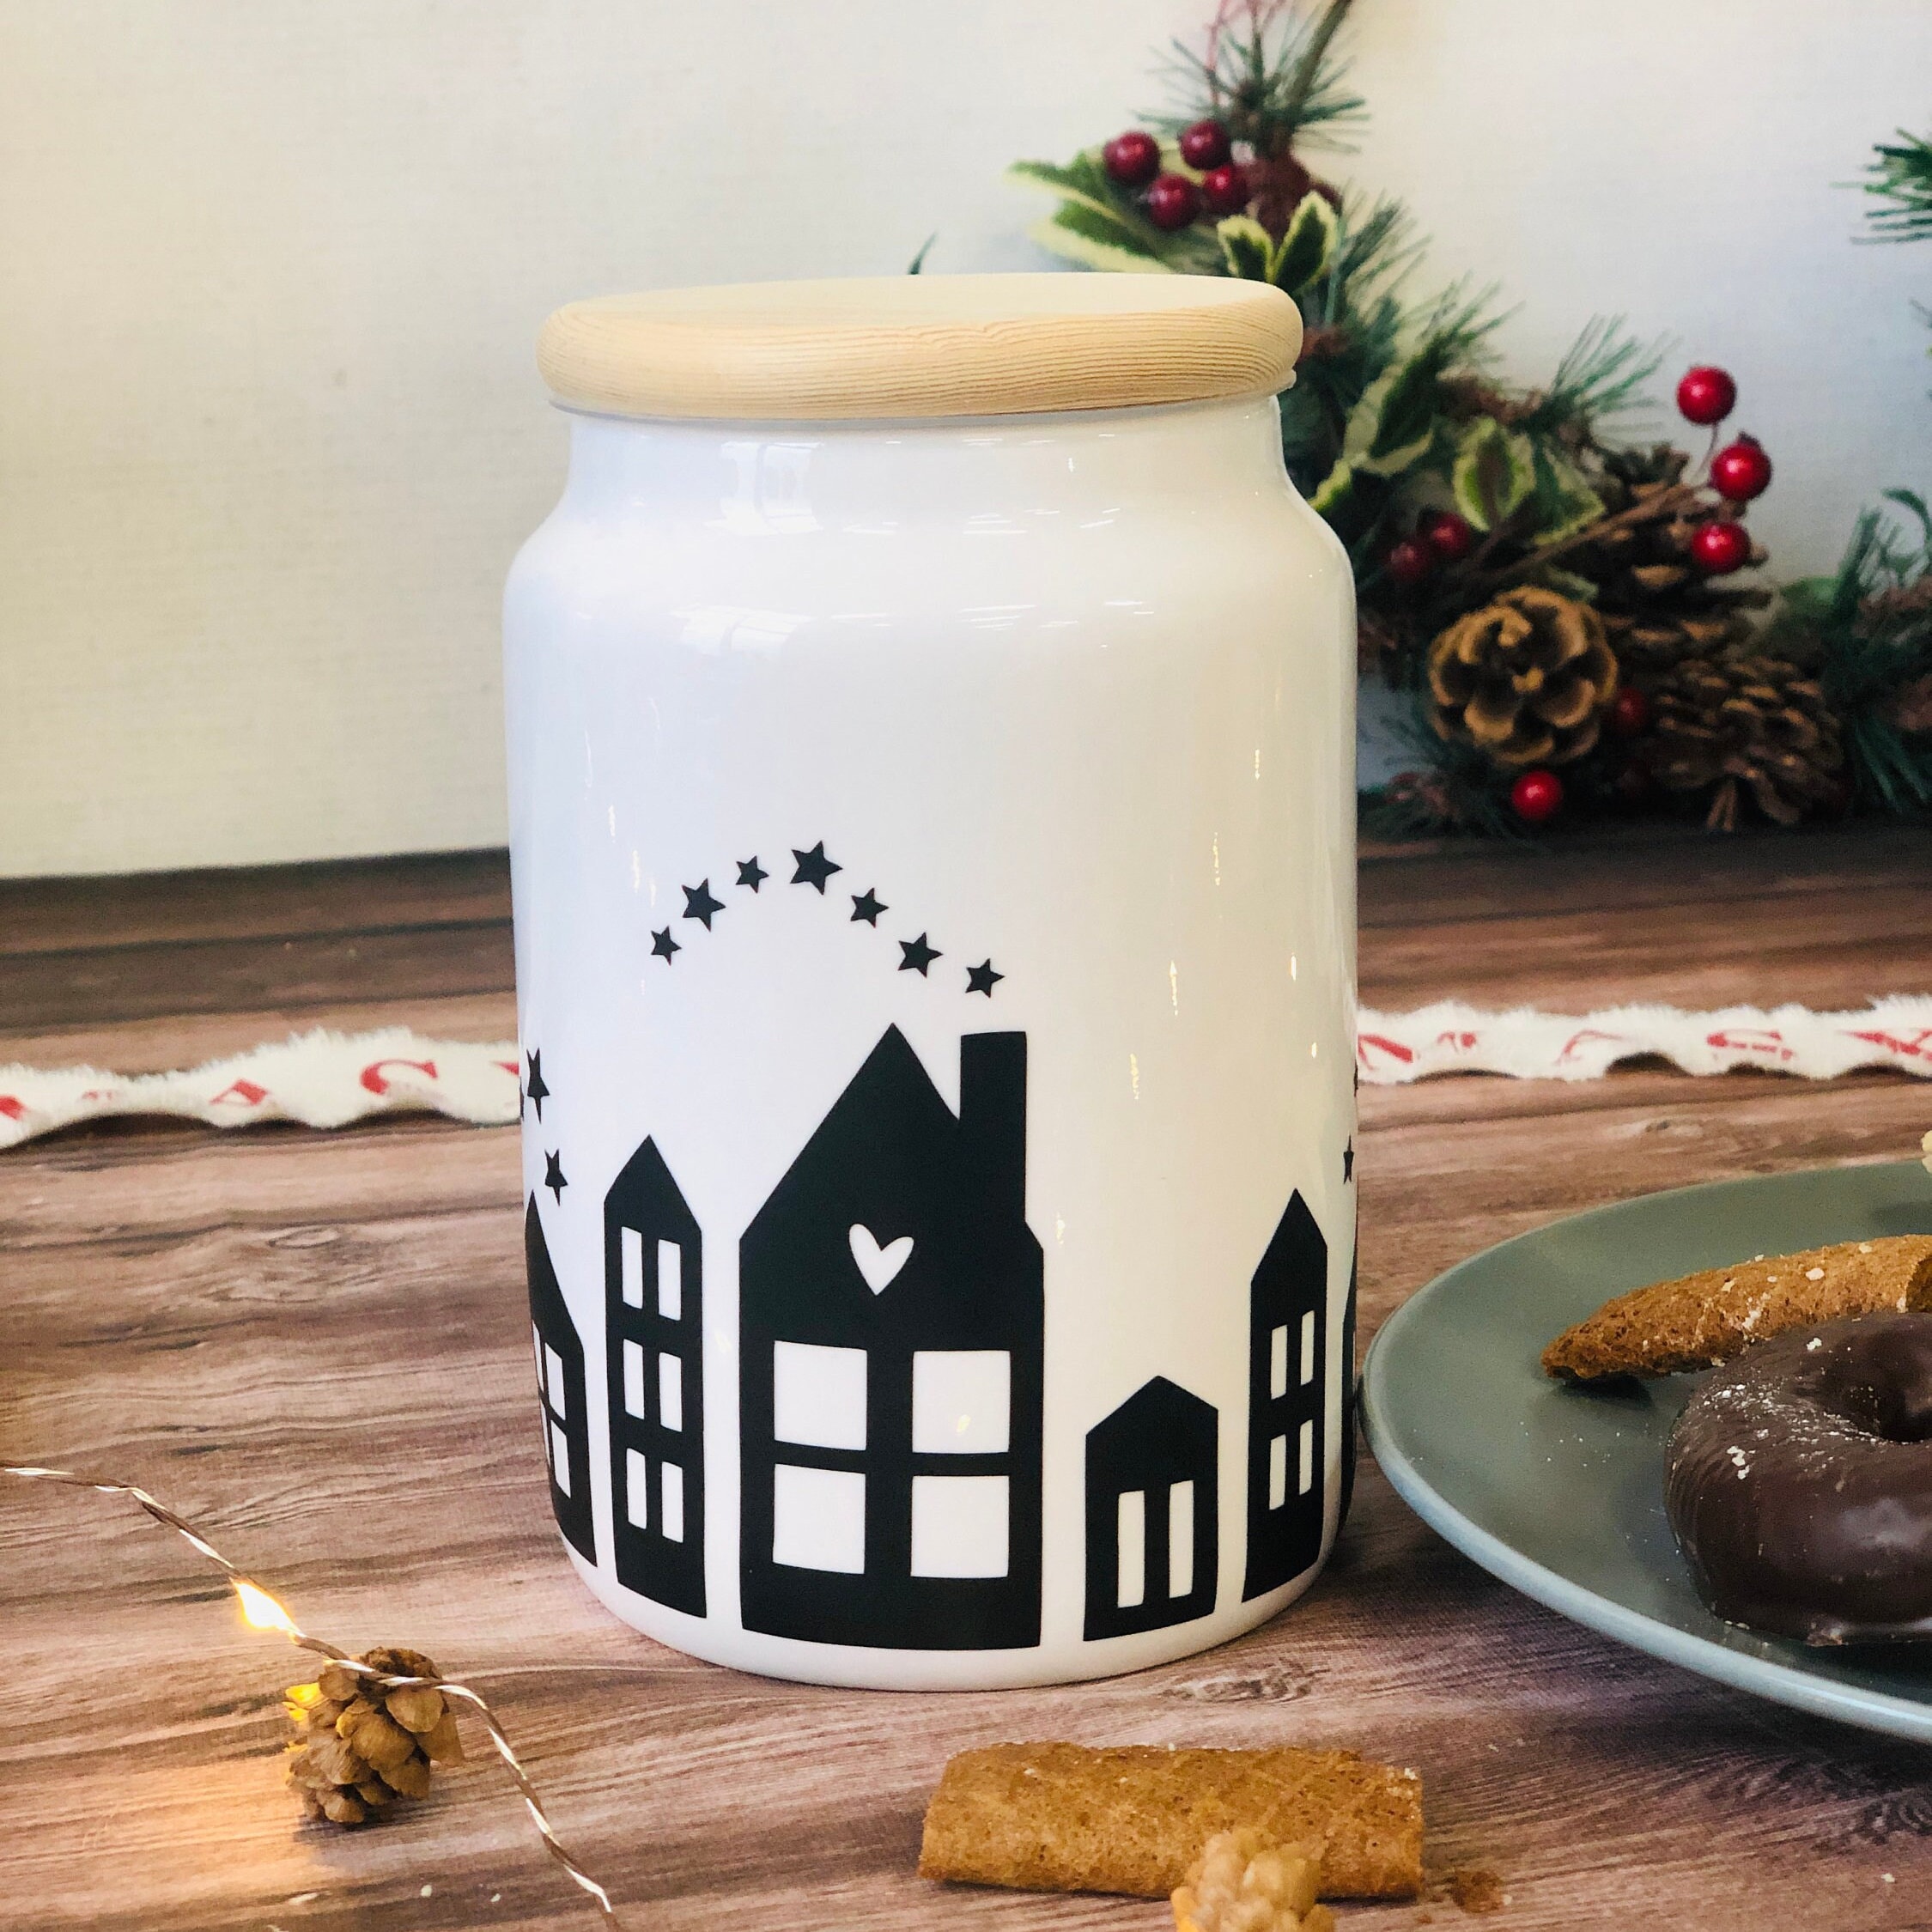 Cookie Jar Personalized With Desired Text, Gift Christmas, Mom, Grandma,  Cookie Box, Storage Jar Ceramic With Wooden Lid Design Houses 